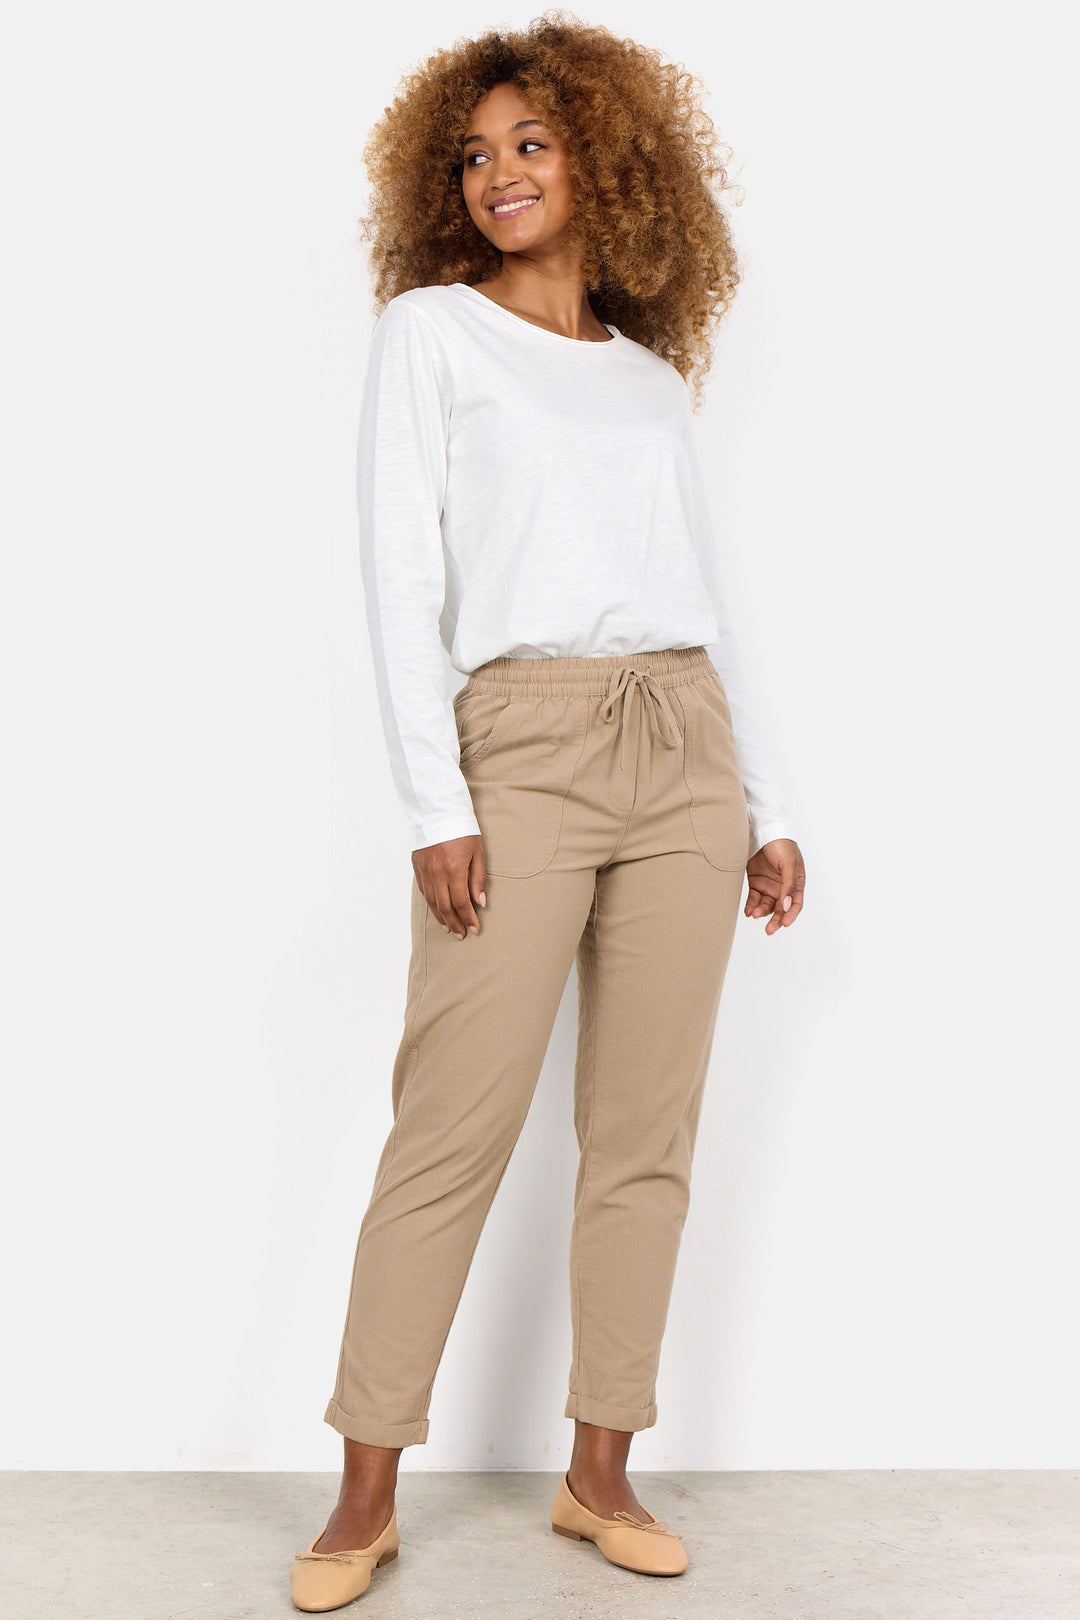 Soya Concept Spring 2024 Made of 100% cozy cotton, these slighty cropped pants feature an elastic waist with drawstring and two back pockets for functionality and style. 